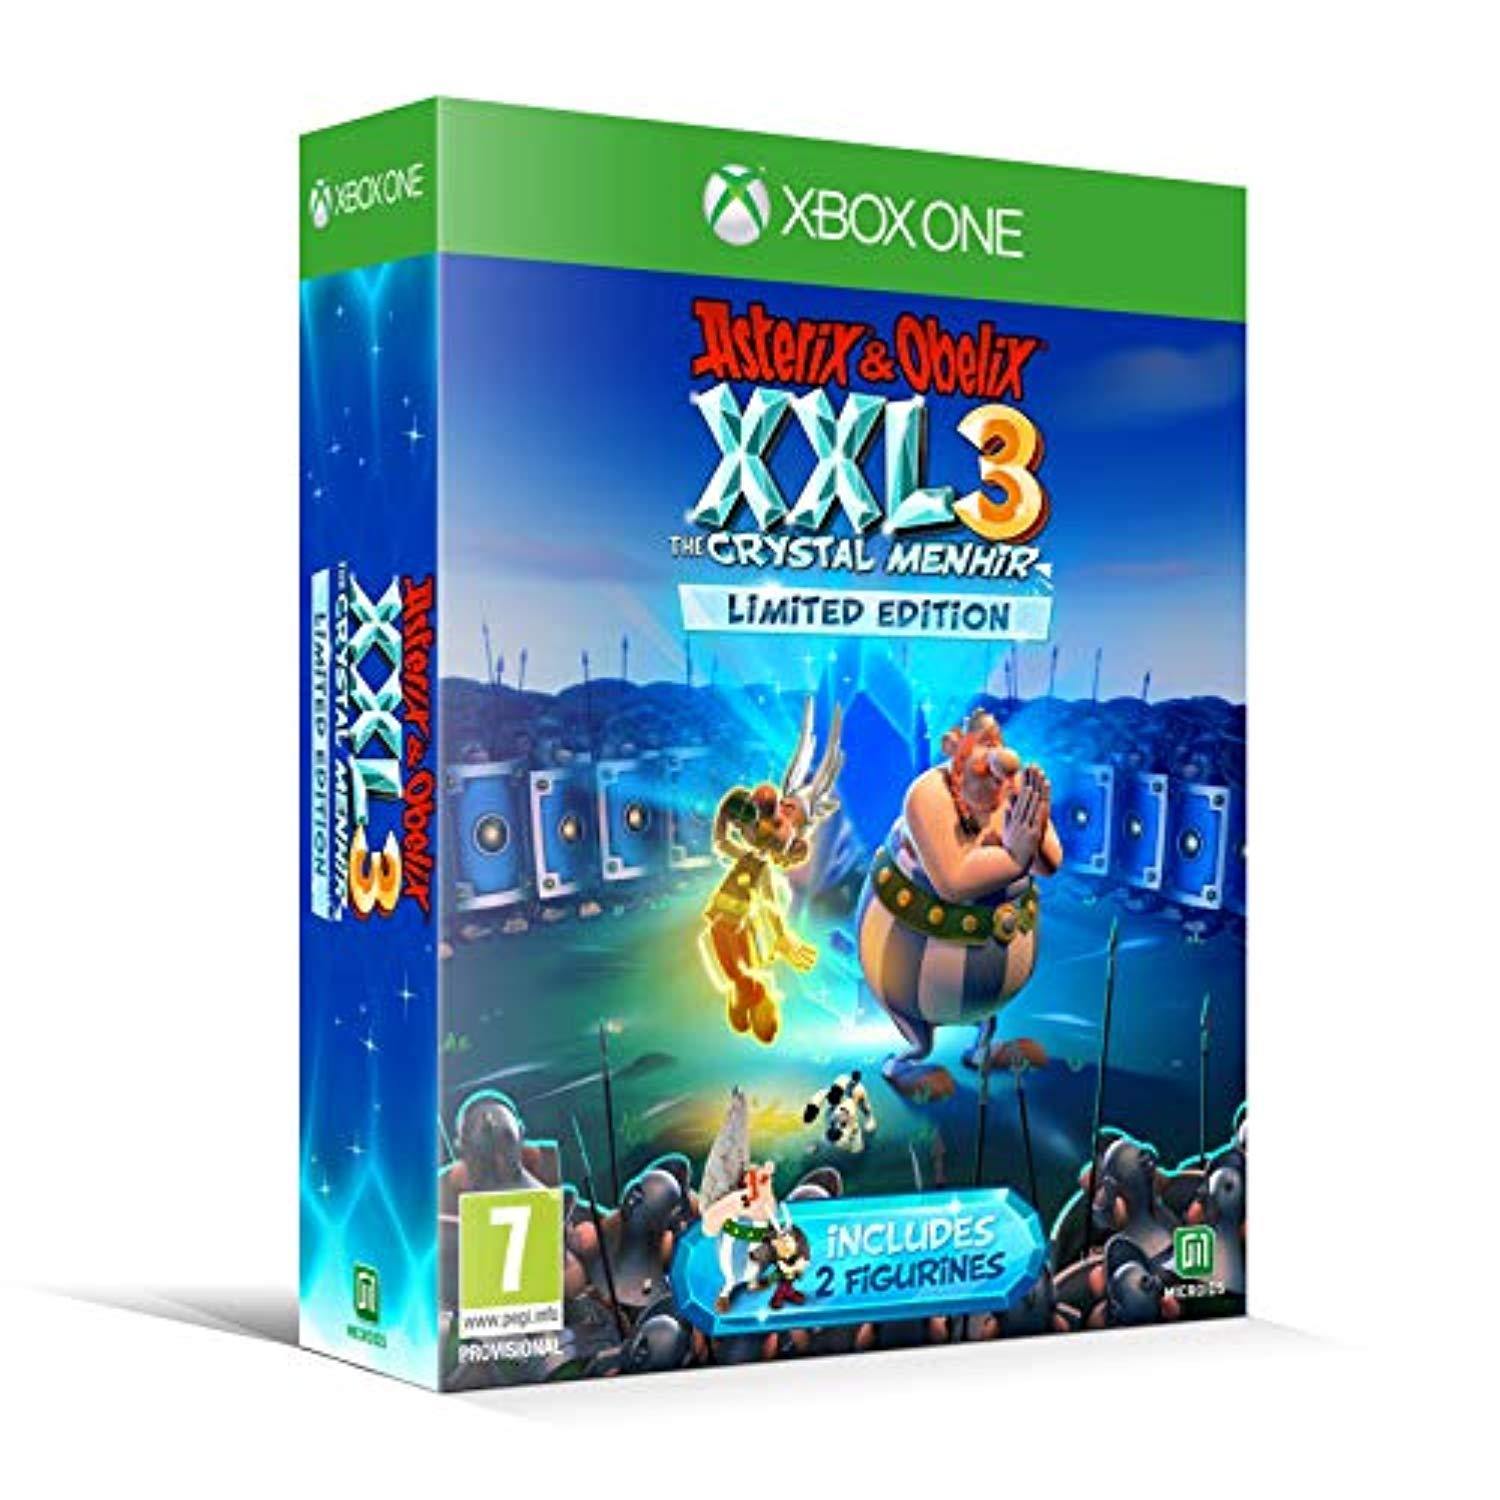 Asterix & Obelix XXL 3: The Crystal Menhir (Xbox One) - Offer Games